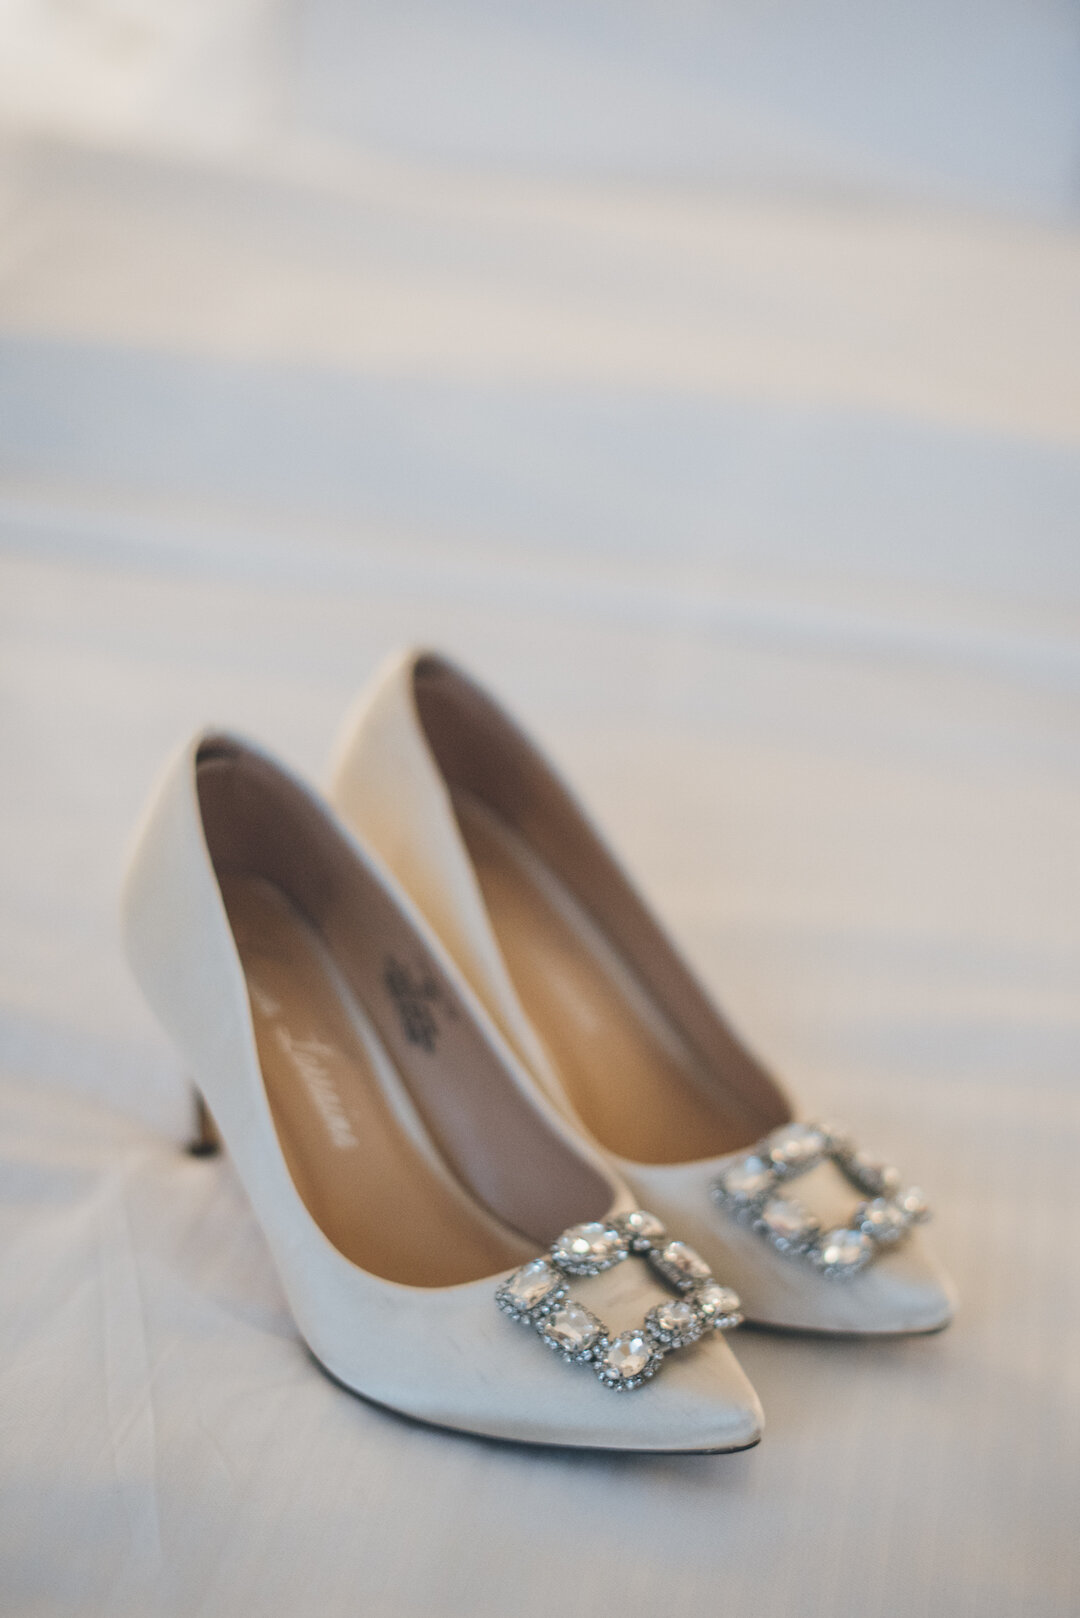 Embellished wedding shoes: Classic Chicago Winter Wedding captured by Zach Caddy featured on CHI thee WED. See more winter wedding ideas at CHItheeWED.com!